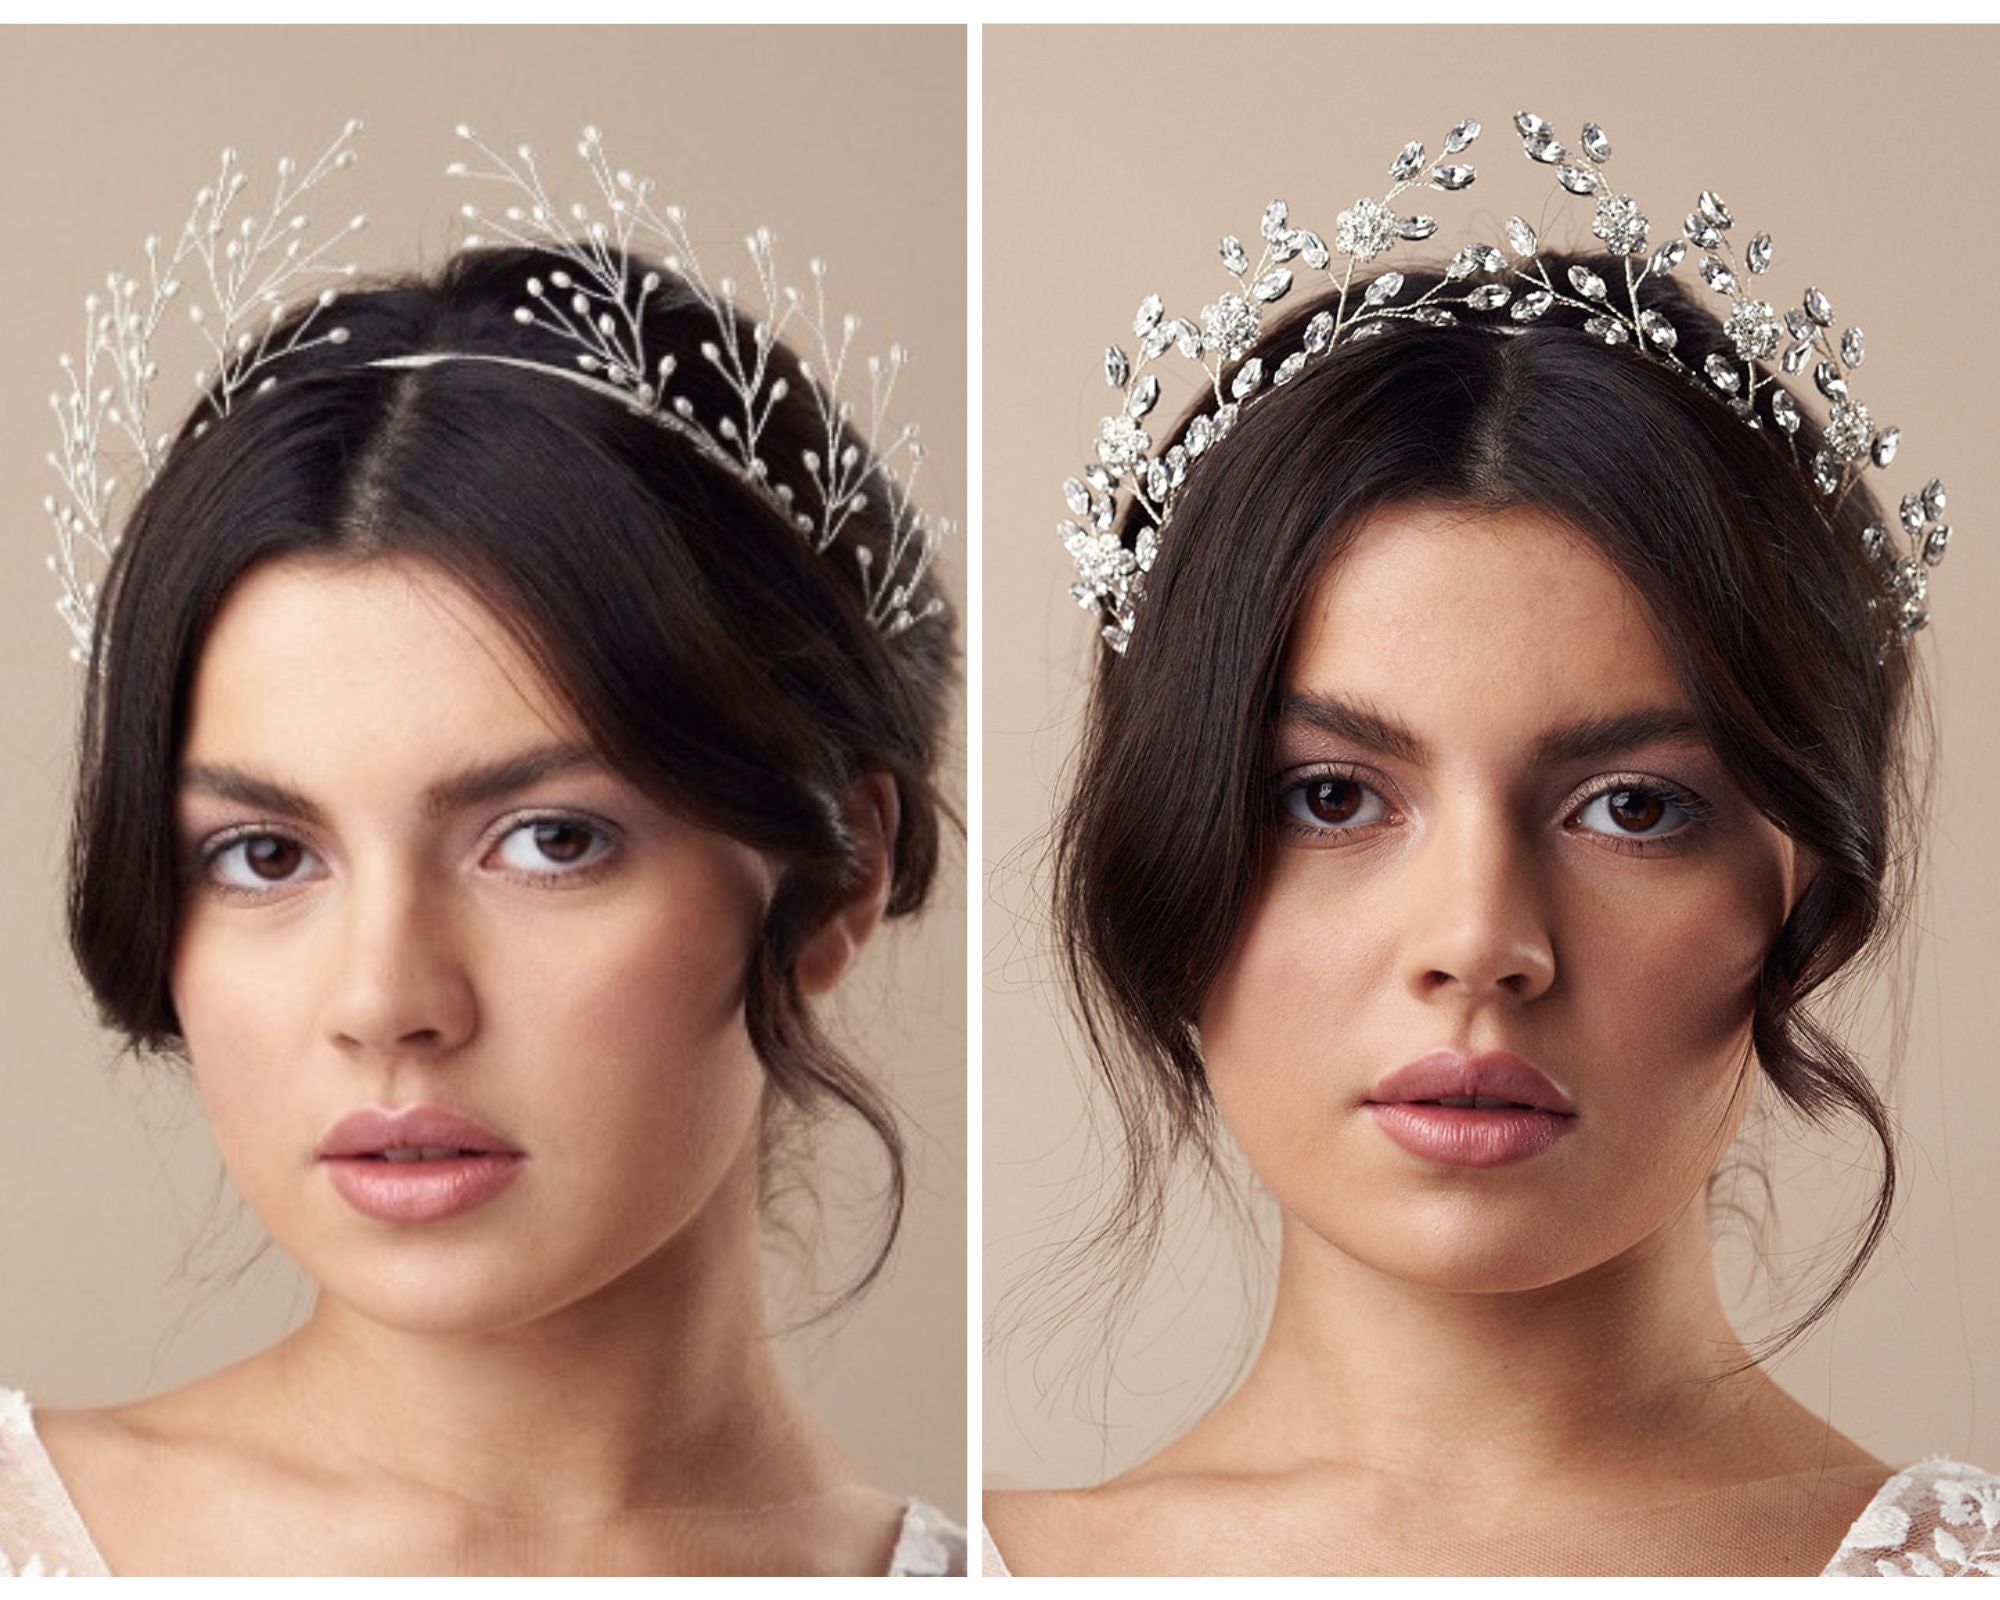 model wears a pearl botanical style crown and then a silver crystal floral crown